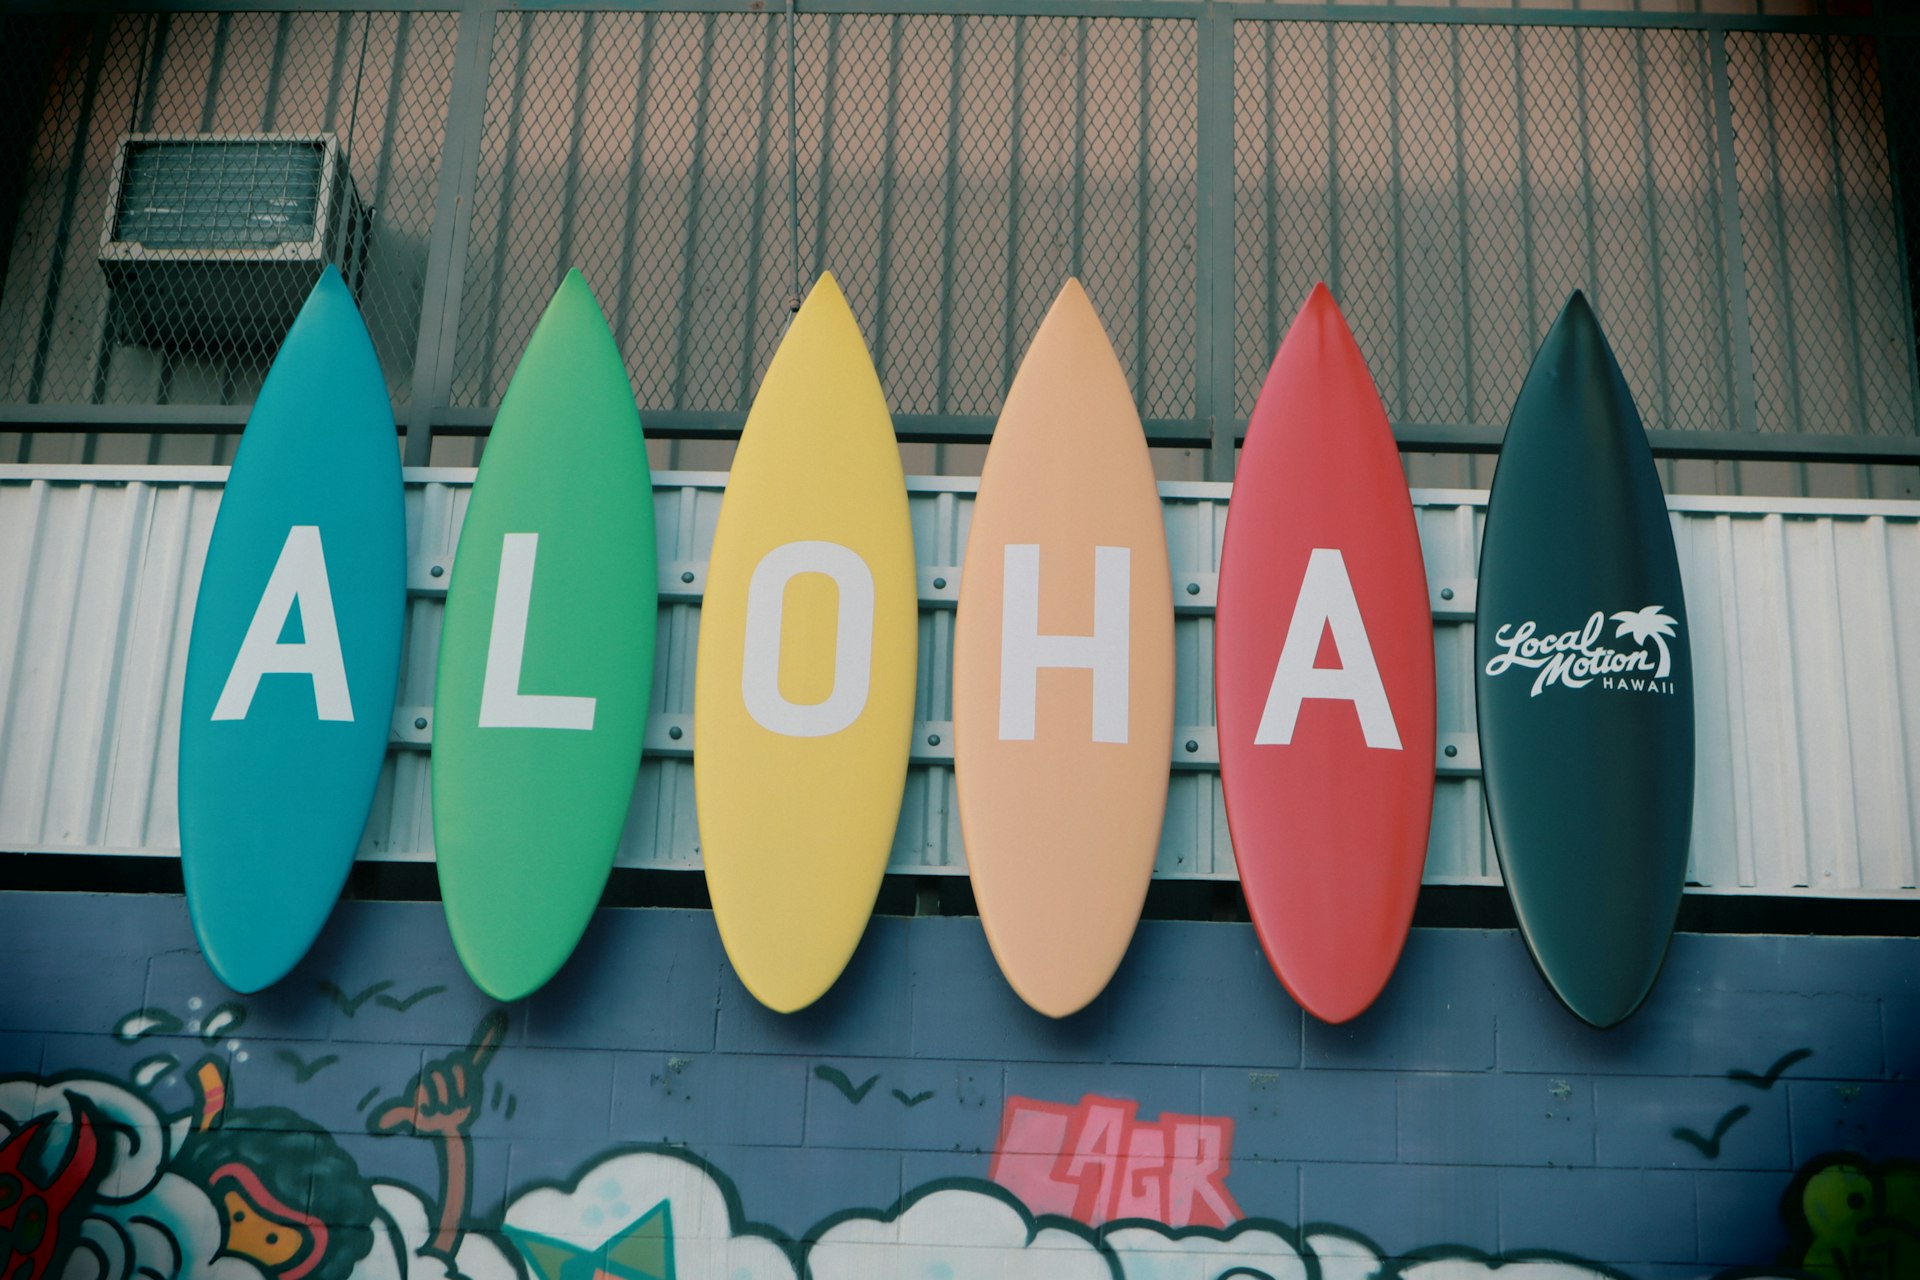 An array of vibrant surfboards neatly lined up, each prominently displaying the word 'Aloha'